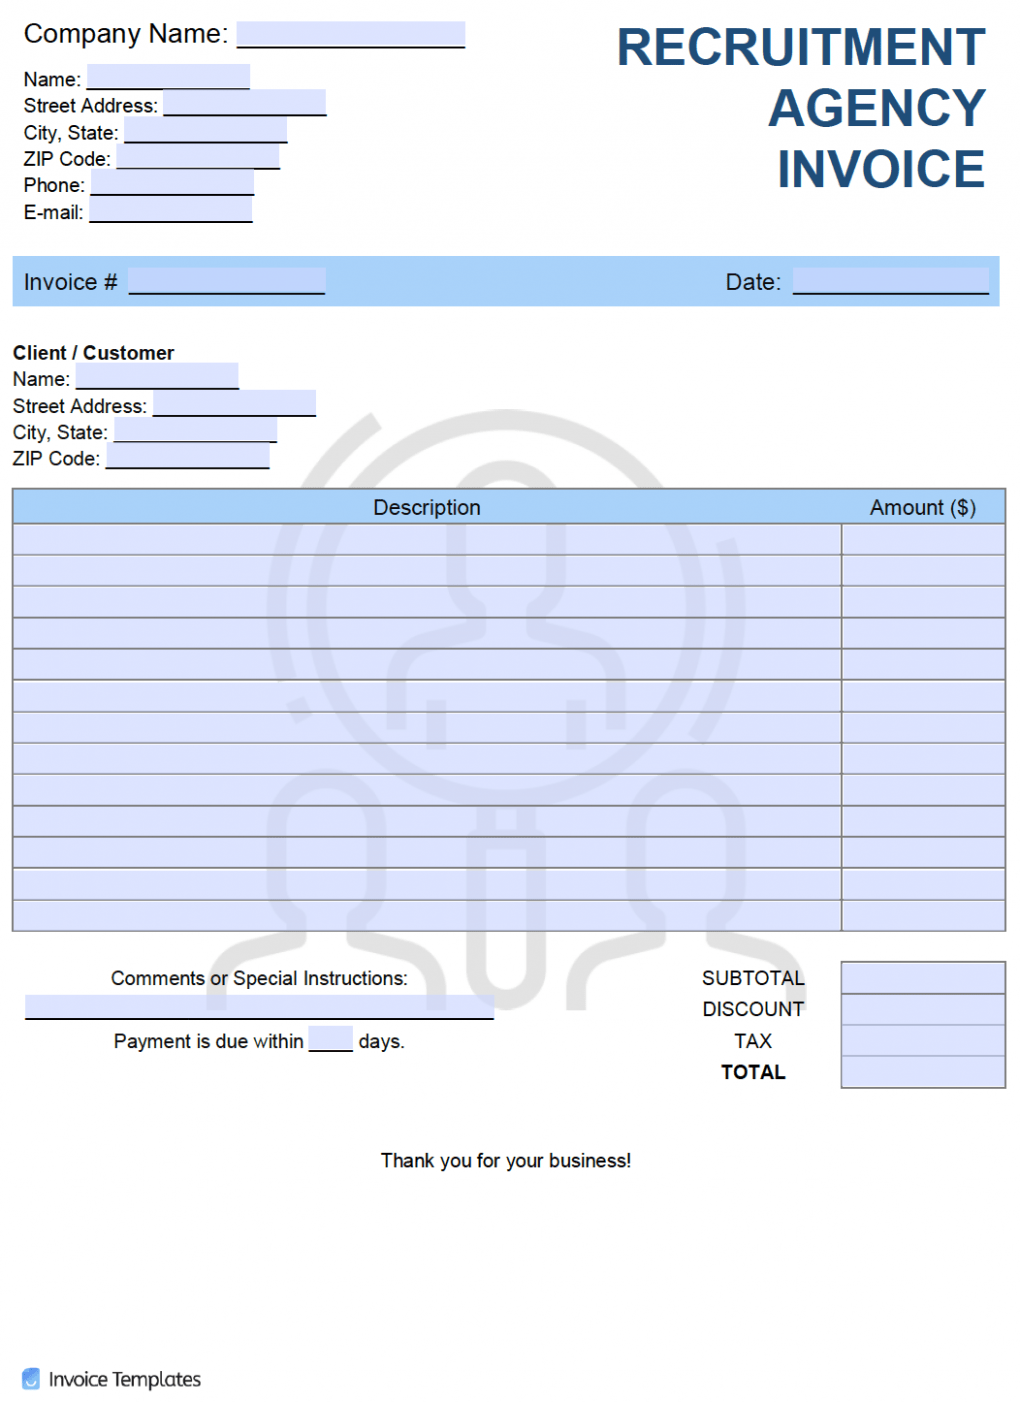 Printable Recruitment Agency Invoice Template 